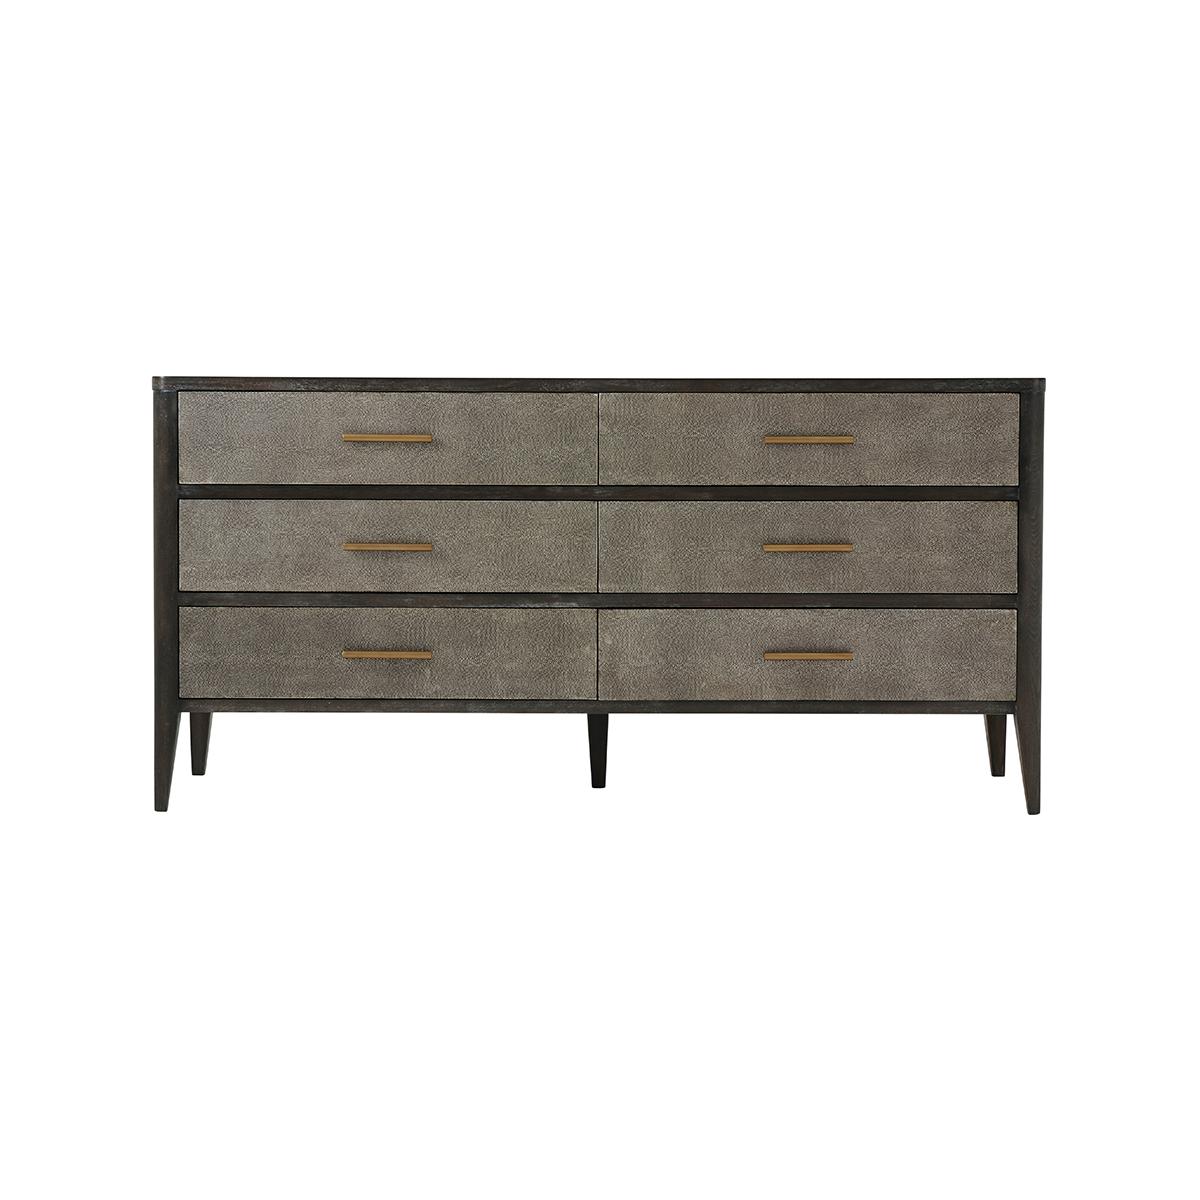 Leather Dresser in a dark rowan finish. The sides and the six drawers are wrapped in dark tempest finish Komodo embossed leather. With brushed brass finish hardware raised on flared tapering legs. 

Dimensions: 66.5